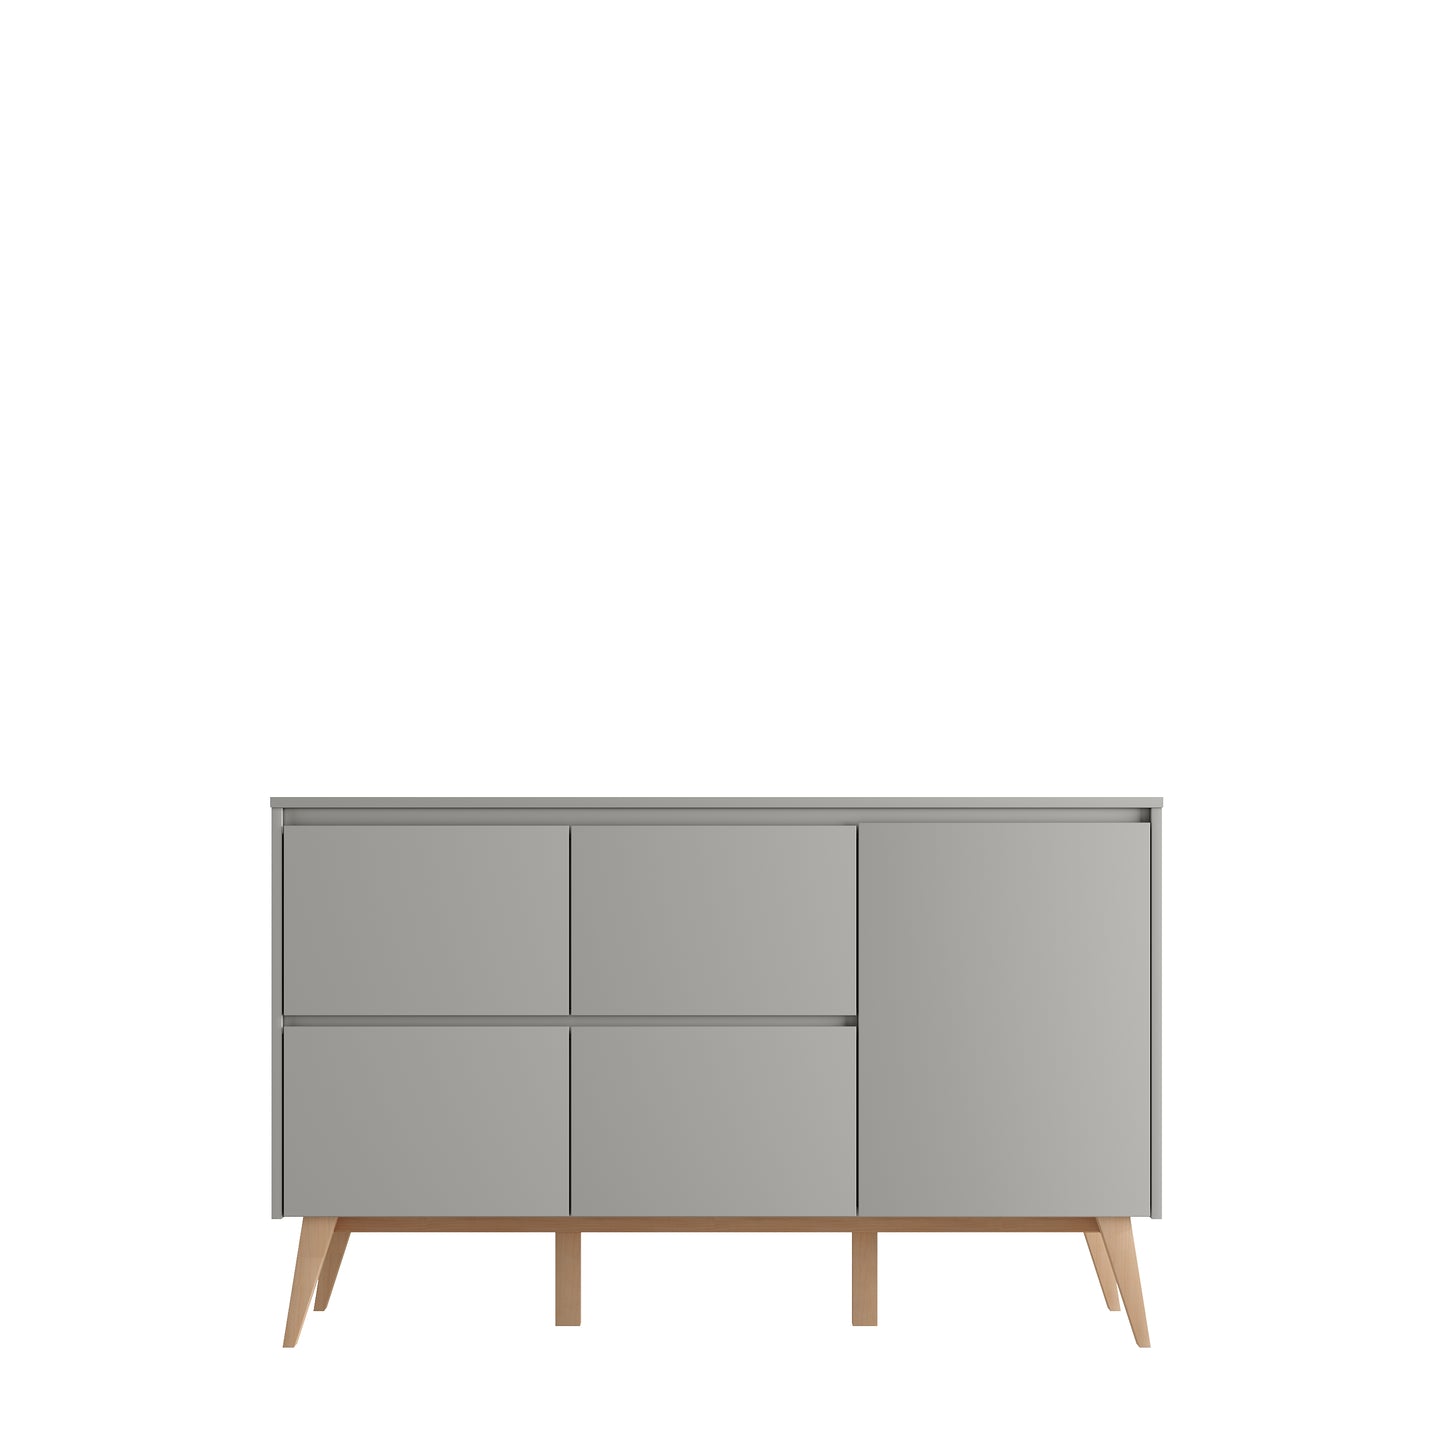 Pinio, Swing Chest of 4 drawers, Grey